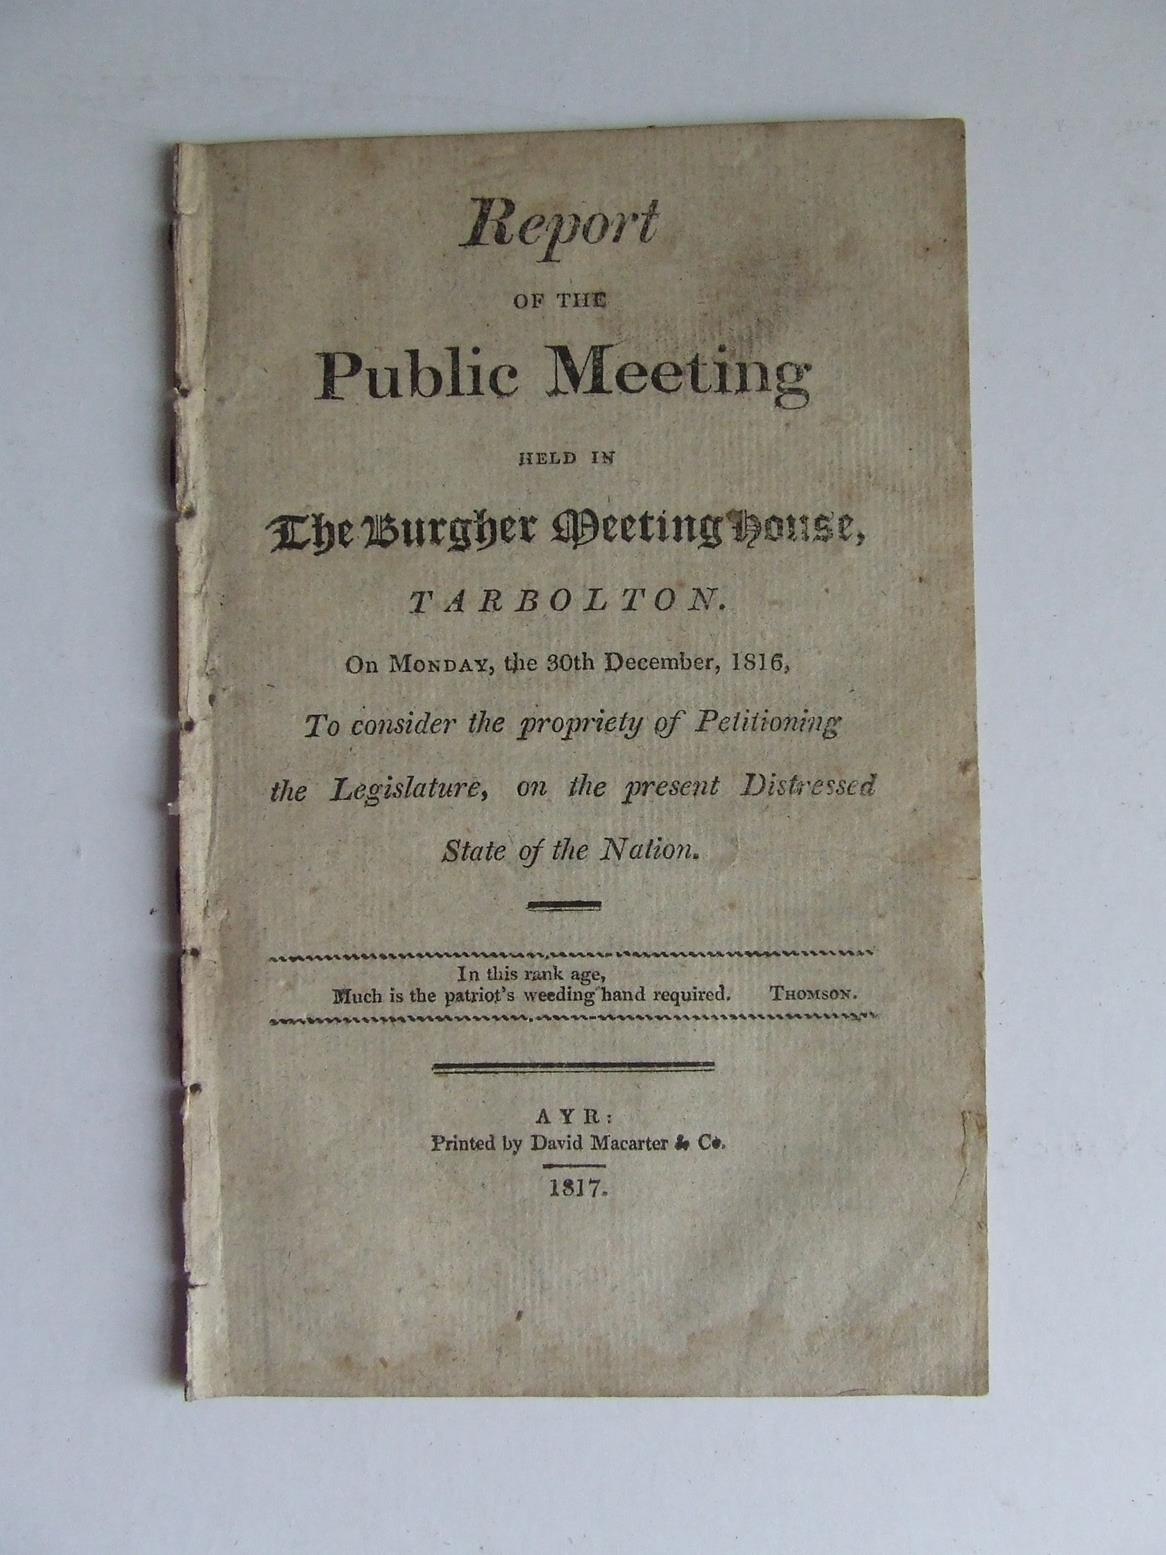 Report of the Public Meeting held in the Burgh Meeting House, Tarbolton. on Monday, the 30th December, 1816